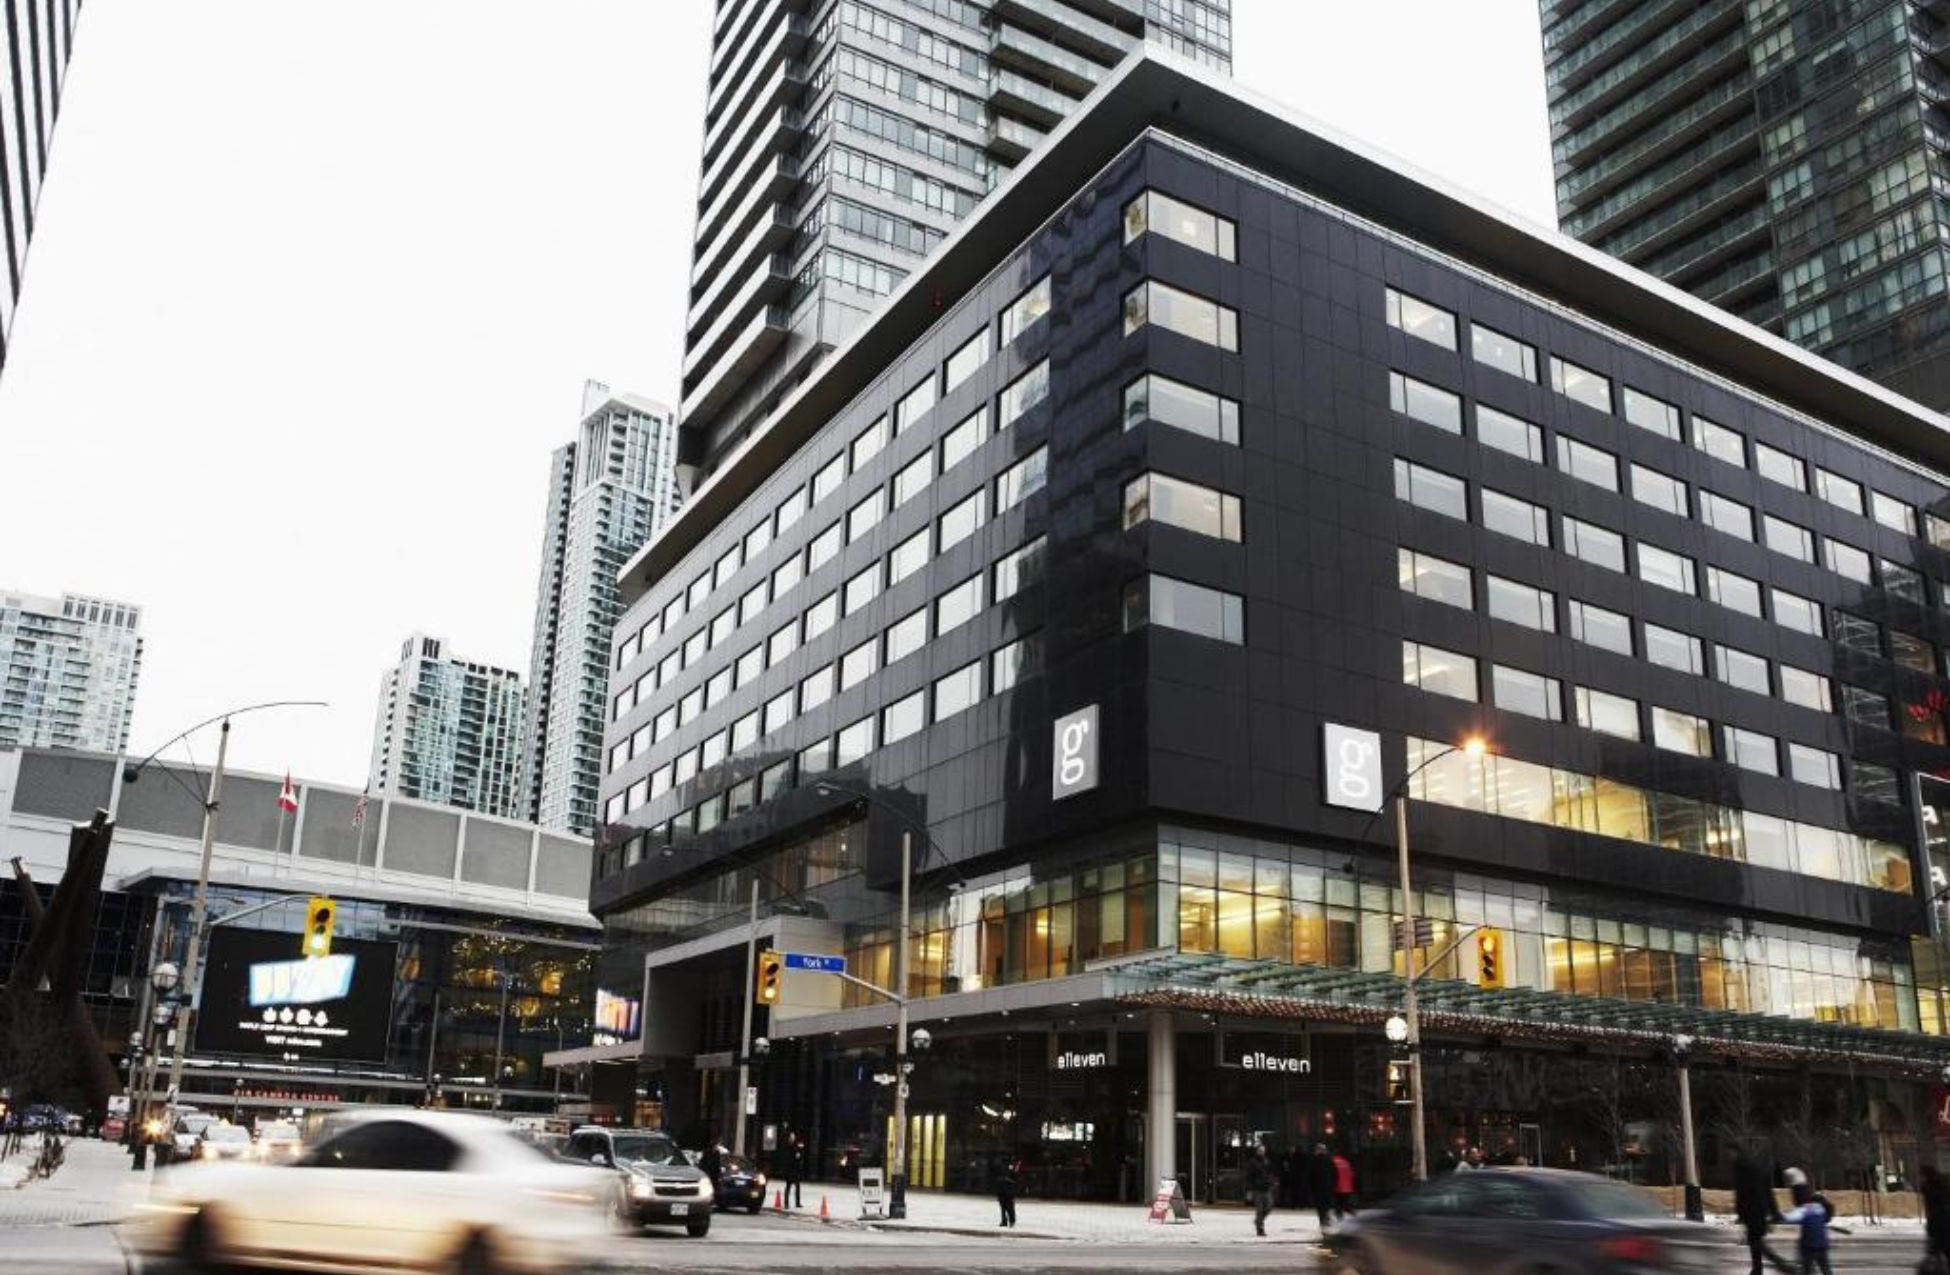 Le Germain Hotel Maple Leaf Square - Best Hotels In Toronto